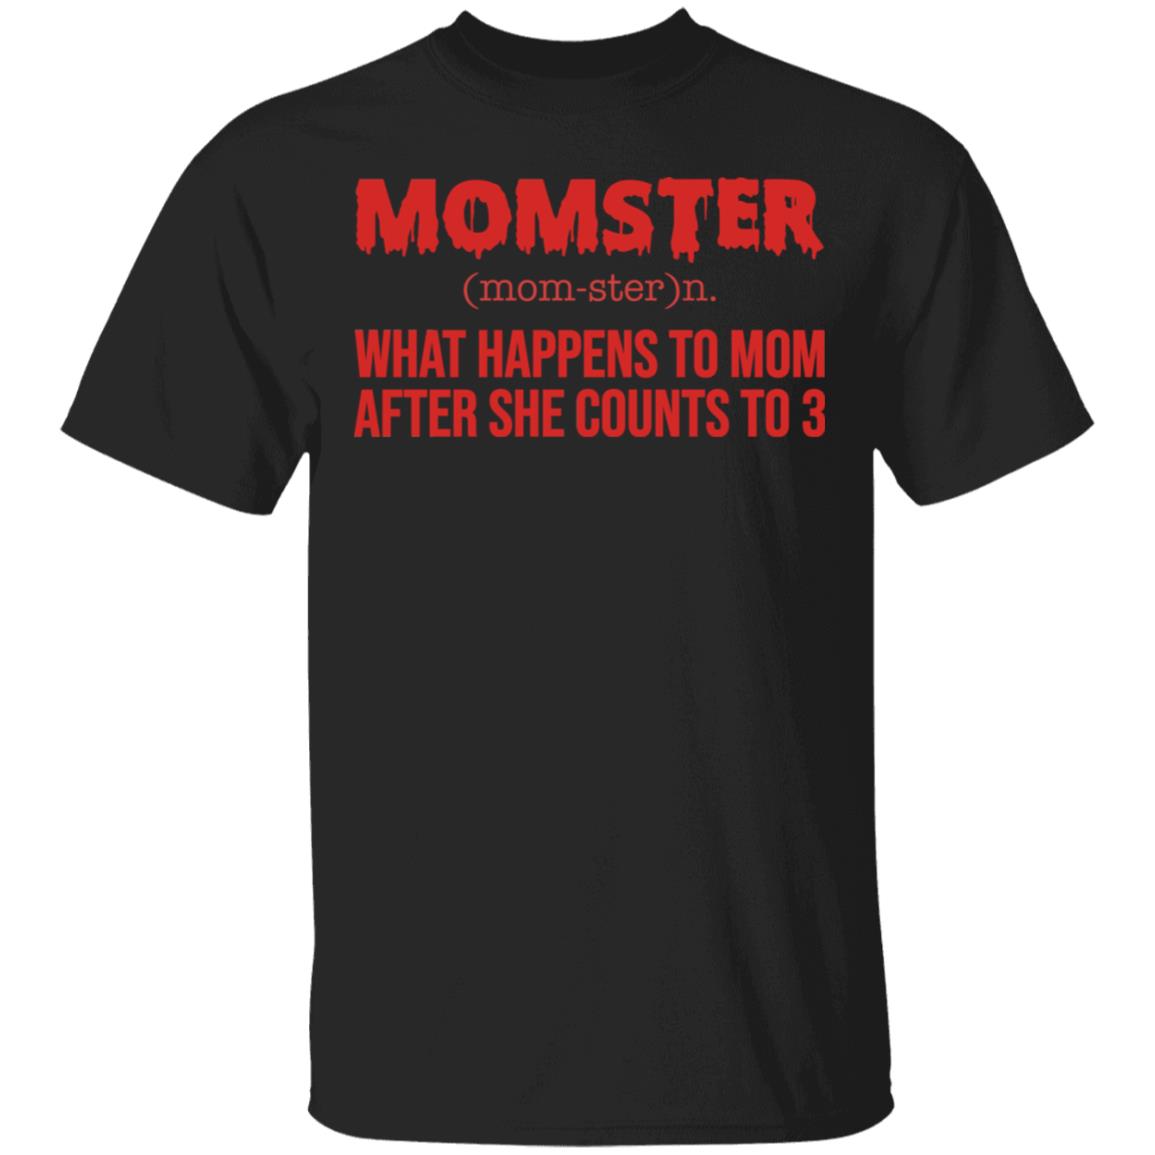 Momster what happens to mom after she counts to 3 shirt - Rockatee